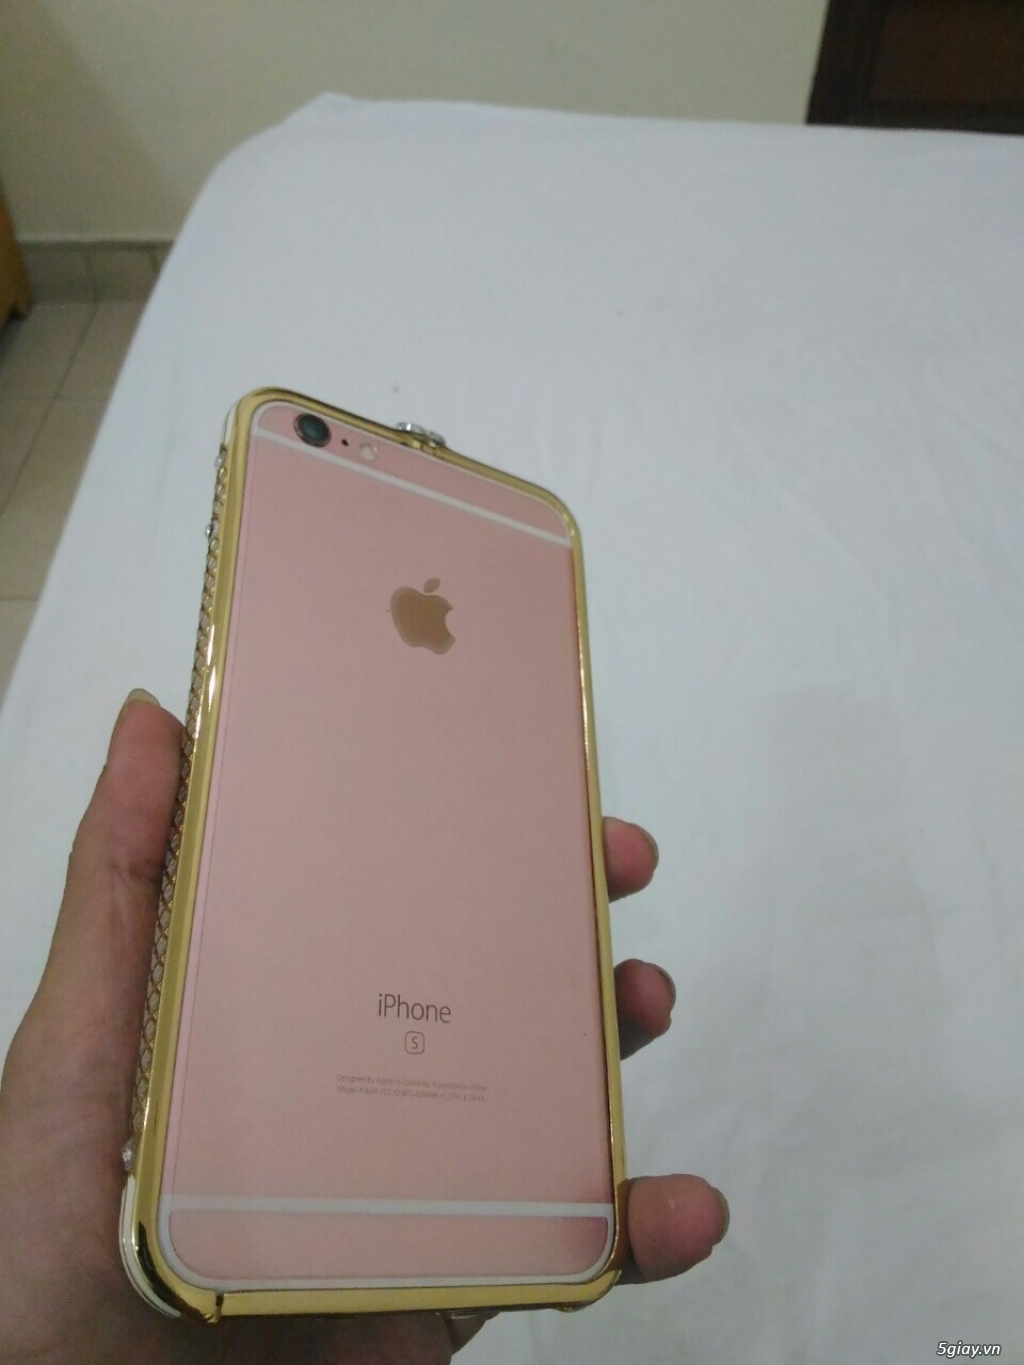 Iphone 6s Plus 128gb rosa gold like new - 2